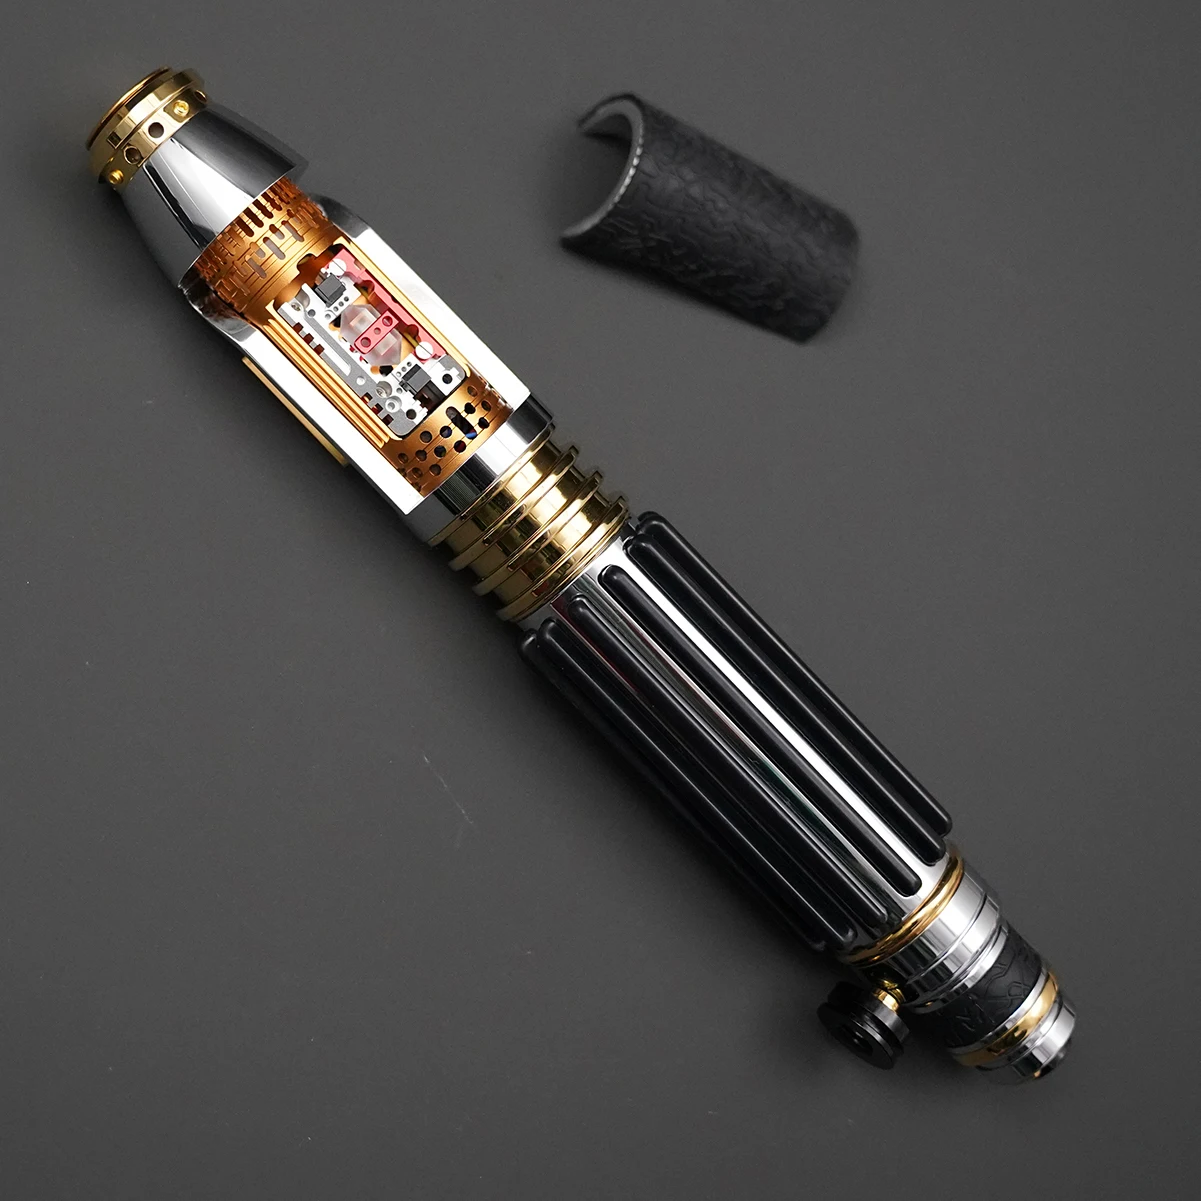 

89sabers New Crystal Chamber Mace Windu Neopixel Lightsaber Proffie V3 Cosplay shining laser sword heavy dueling toys gift